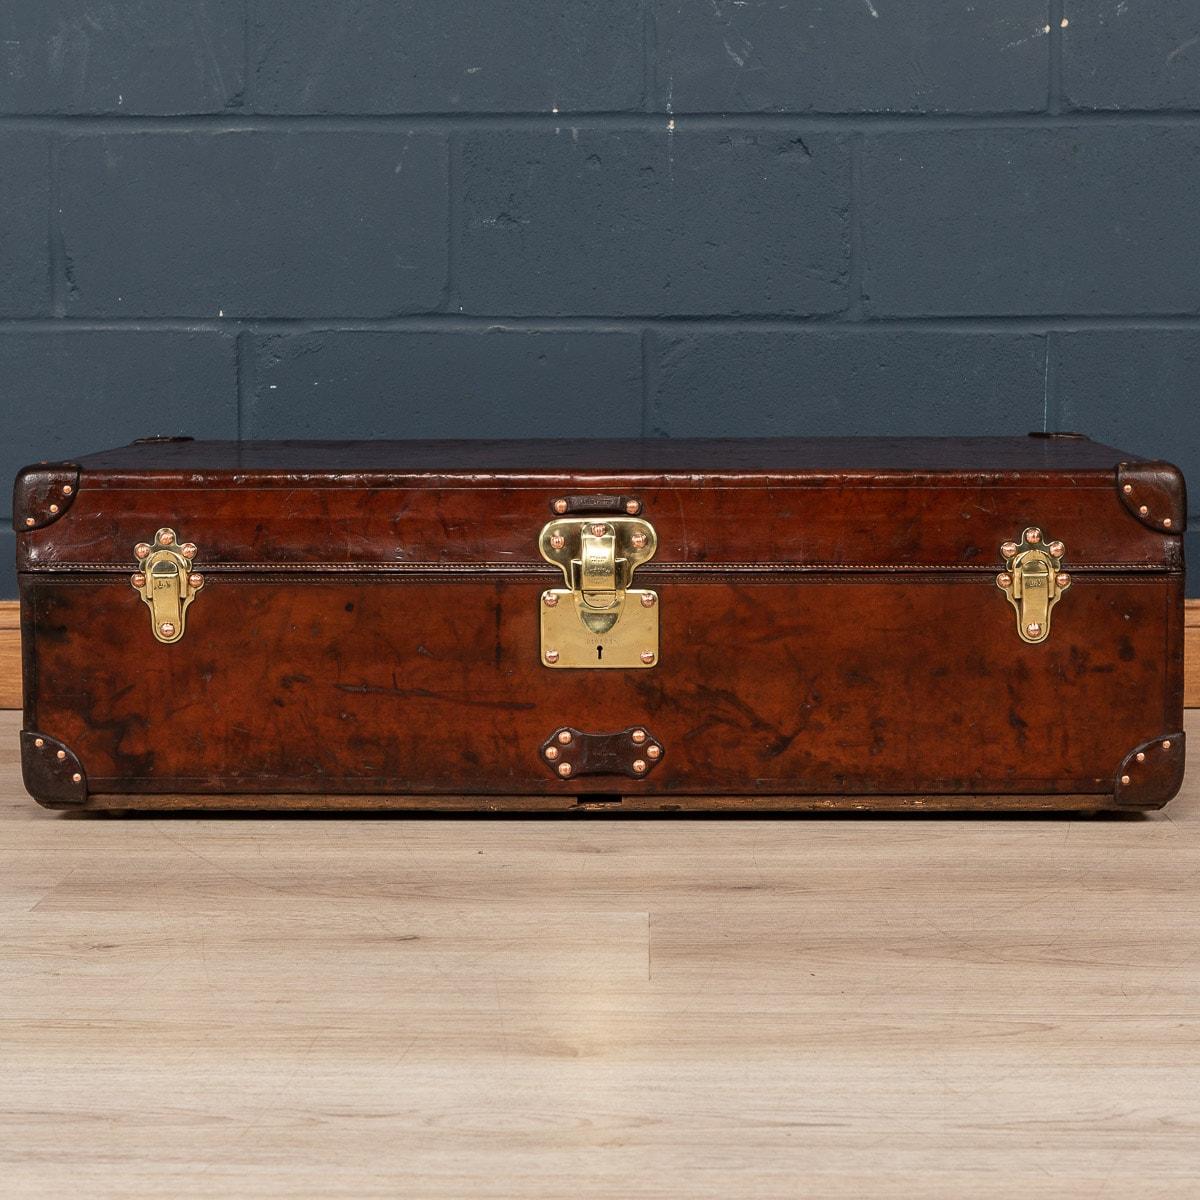 A rare Louis Vuitton cabin trunk covered in leather. Dating to the early part of the 20th century, covered not in the world famous (but more common) monogram canvas but in a single piece of cow hide. These all-leather trunks were made by special